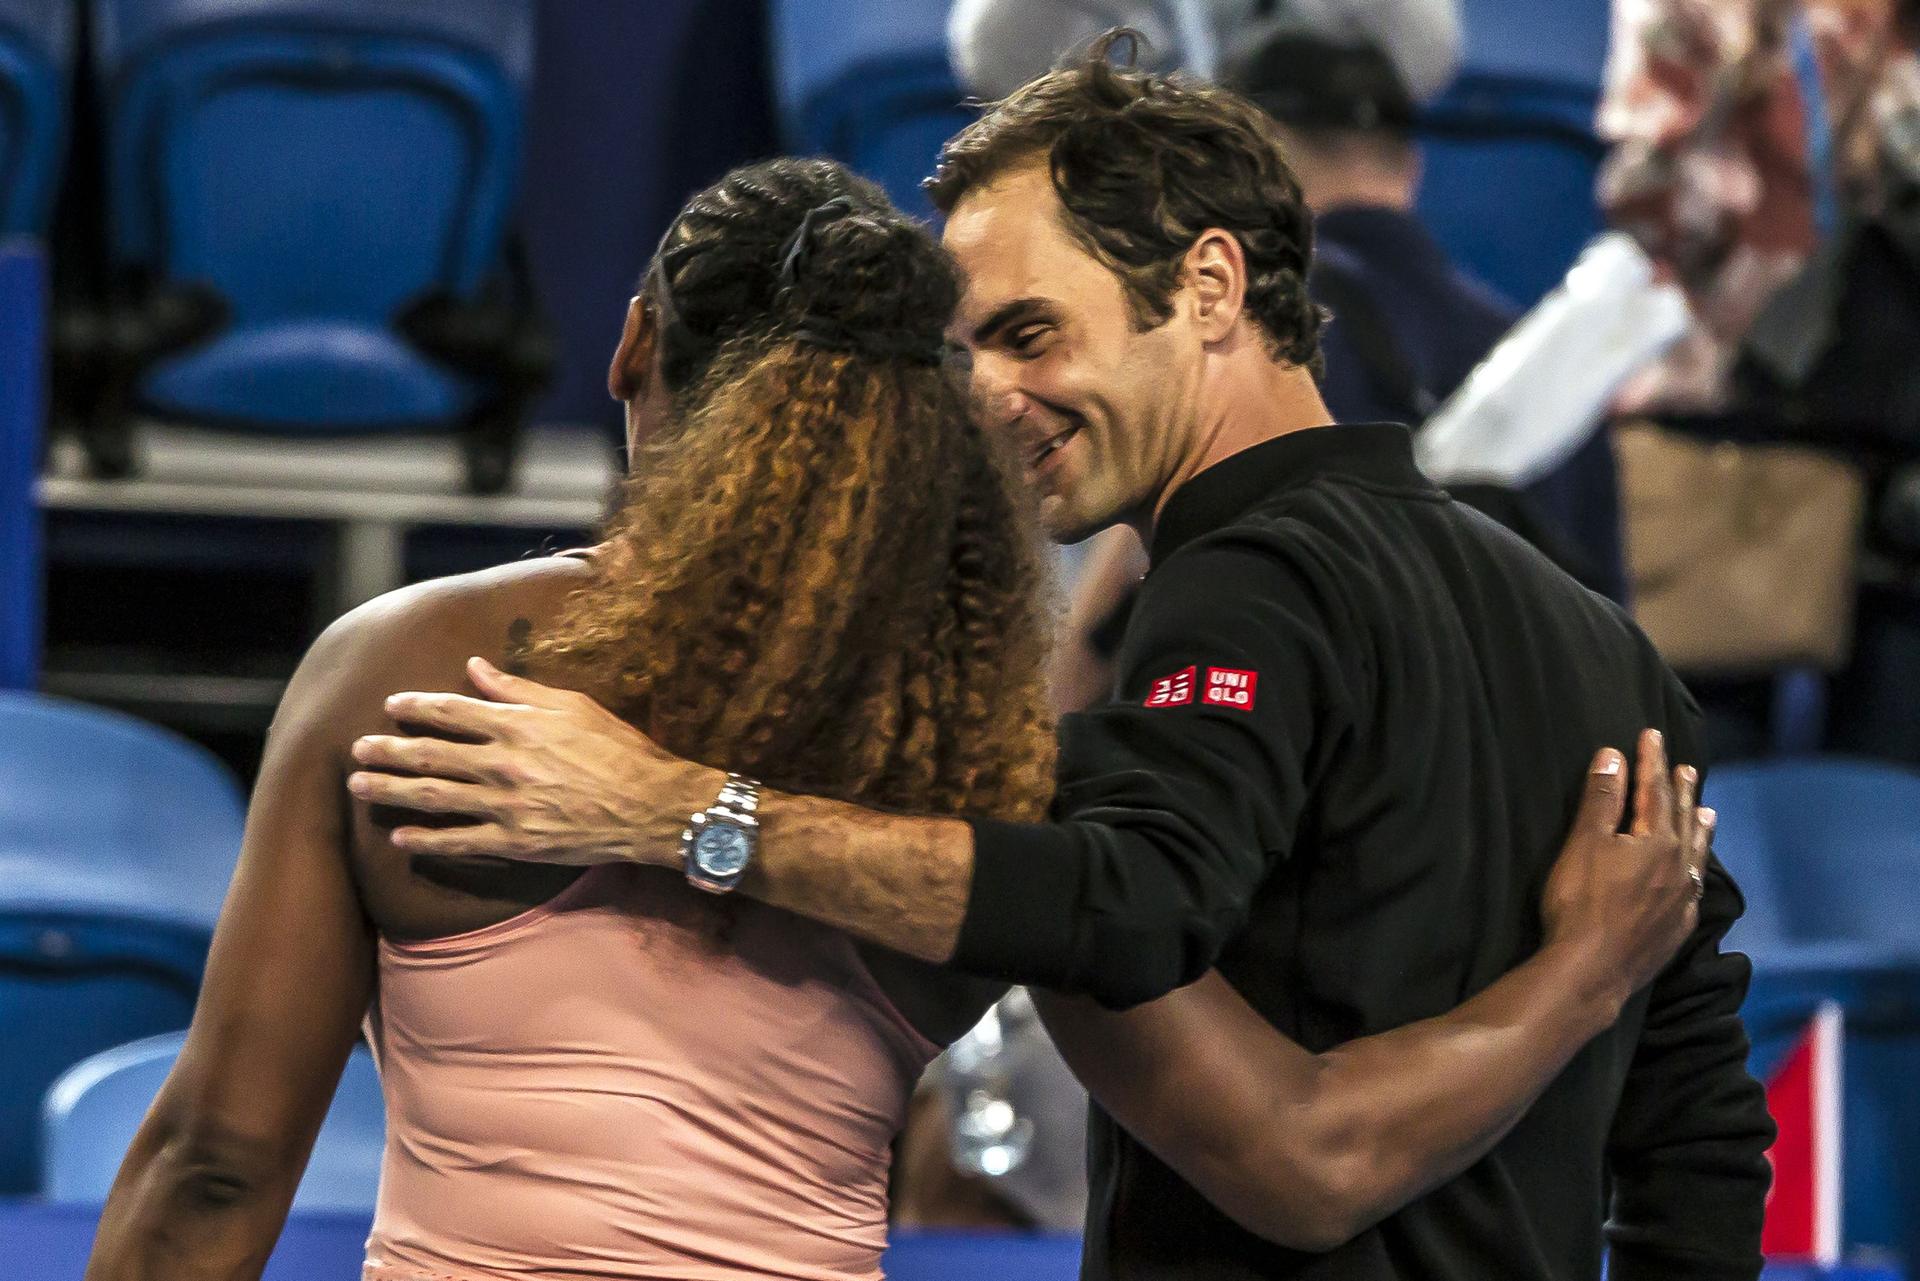 Tennis players Serena Williams and Roger Federer are shown embracing as they walk off the court together.